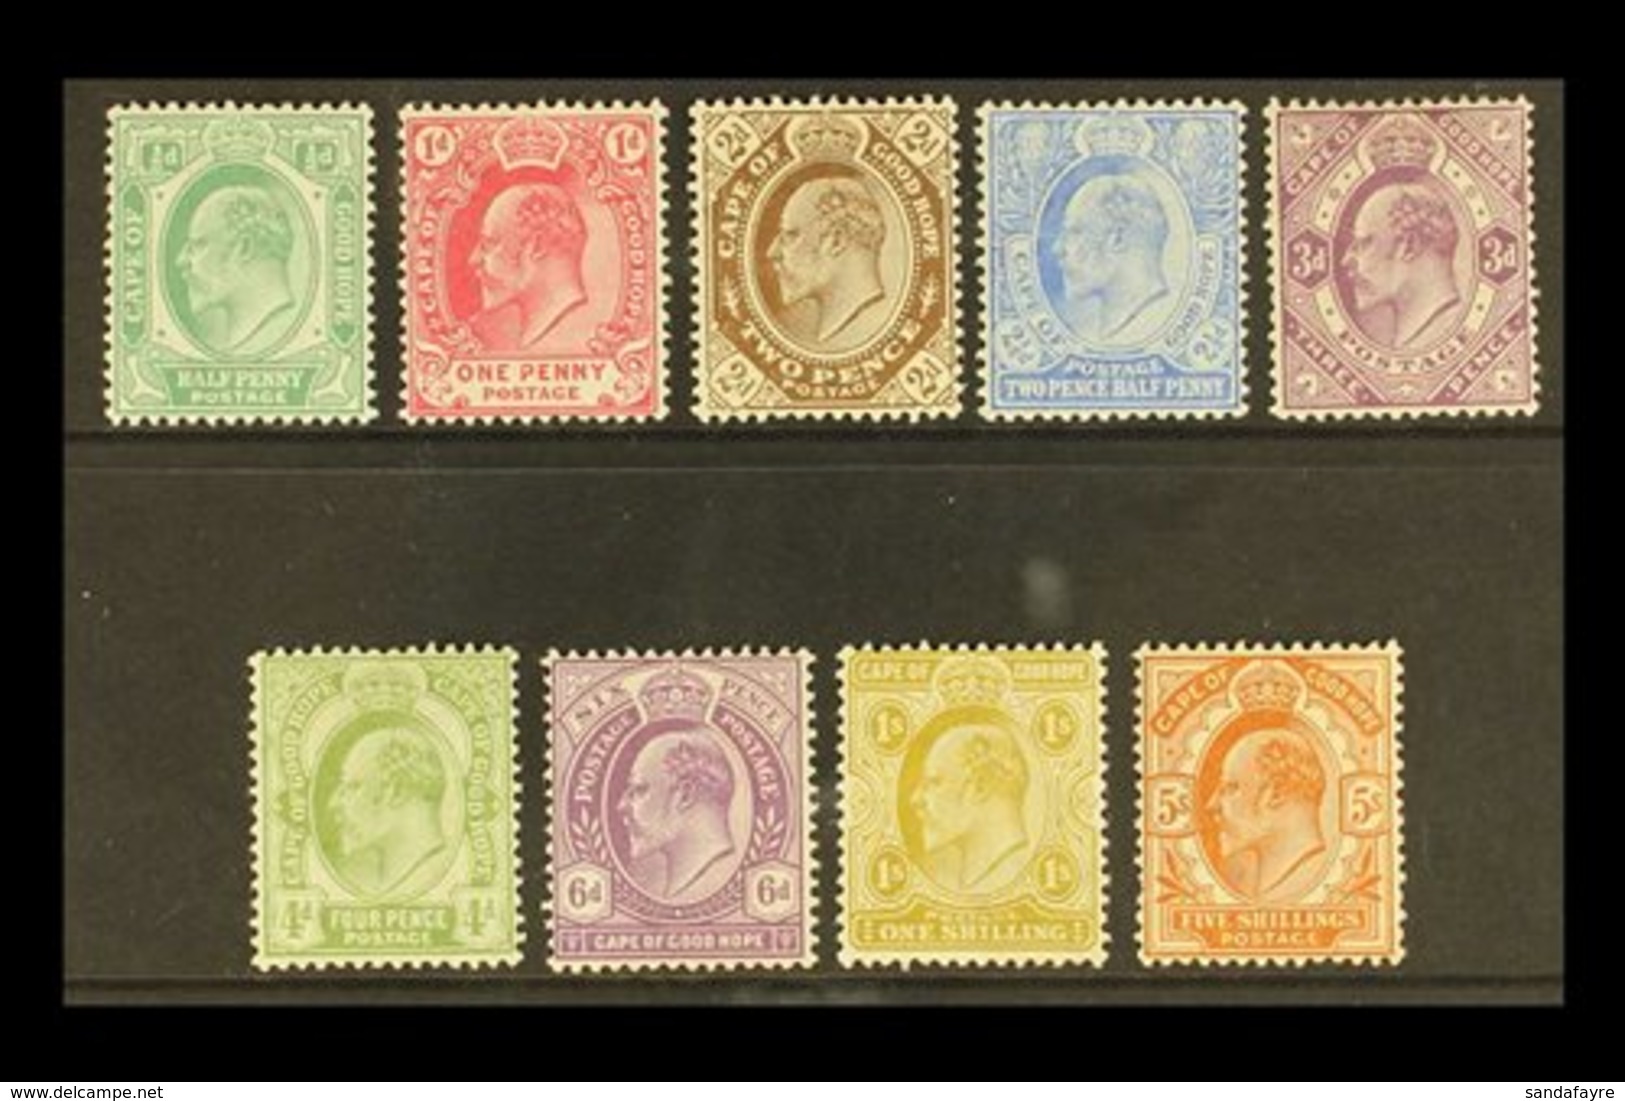 CAPE OF GOOD HOPE 1902-04 KEVII Definitives, Complete Set, SG 70/8, 3d More Heavily Hinged, Others Fine Mint (9 Stamps). - Zonder Classificatie